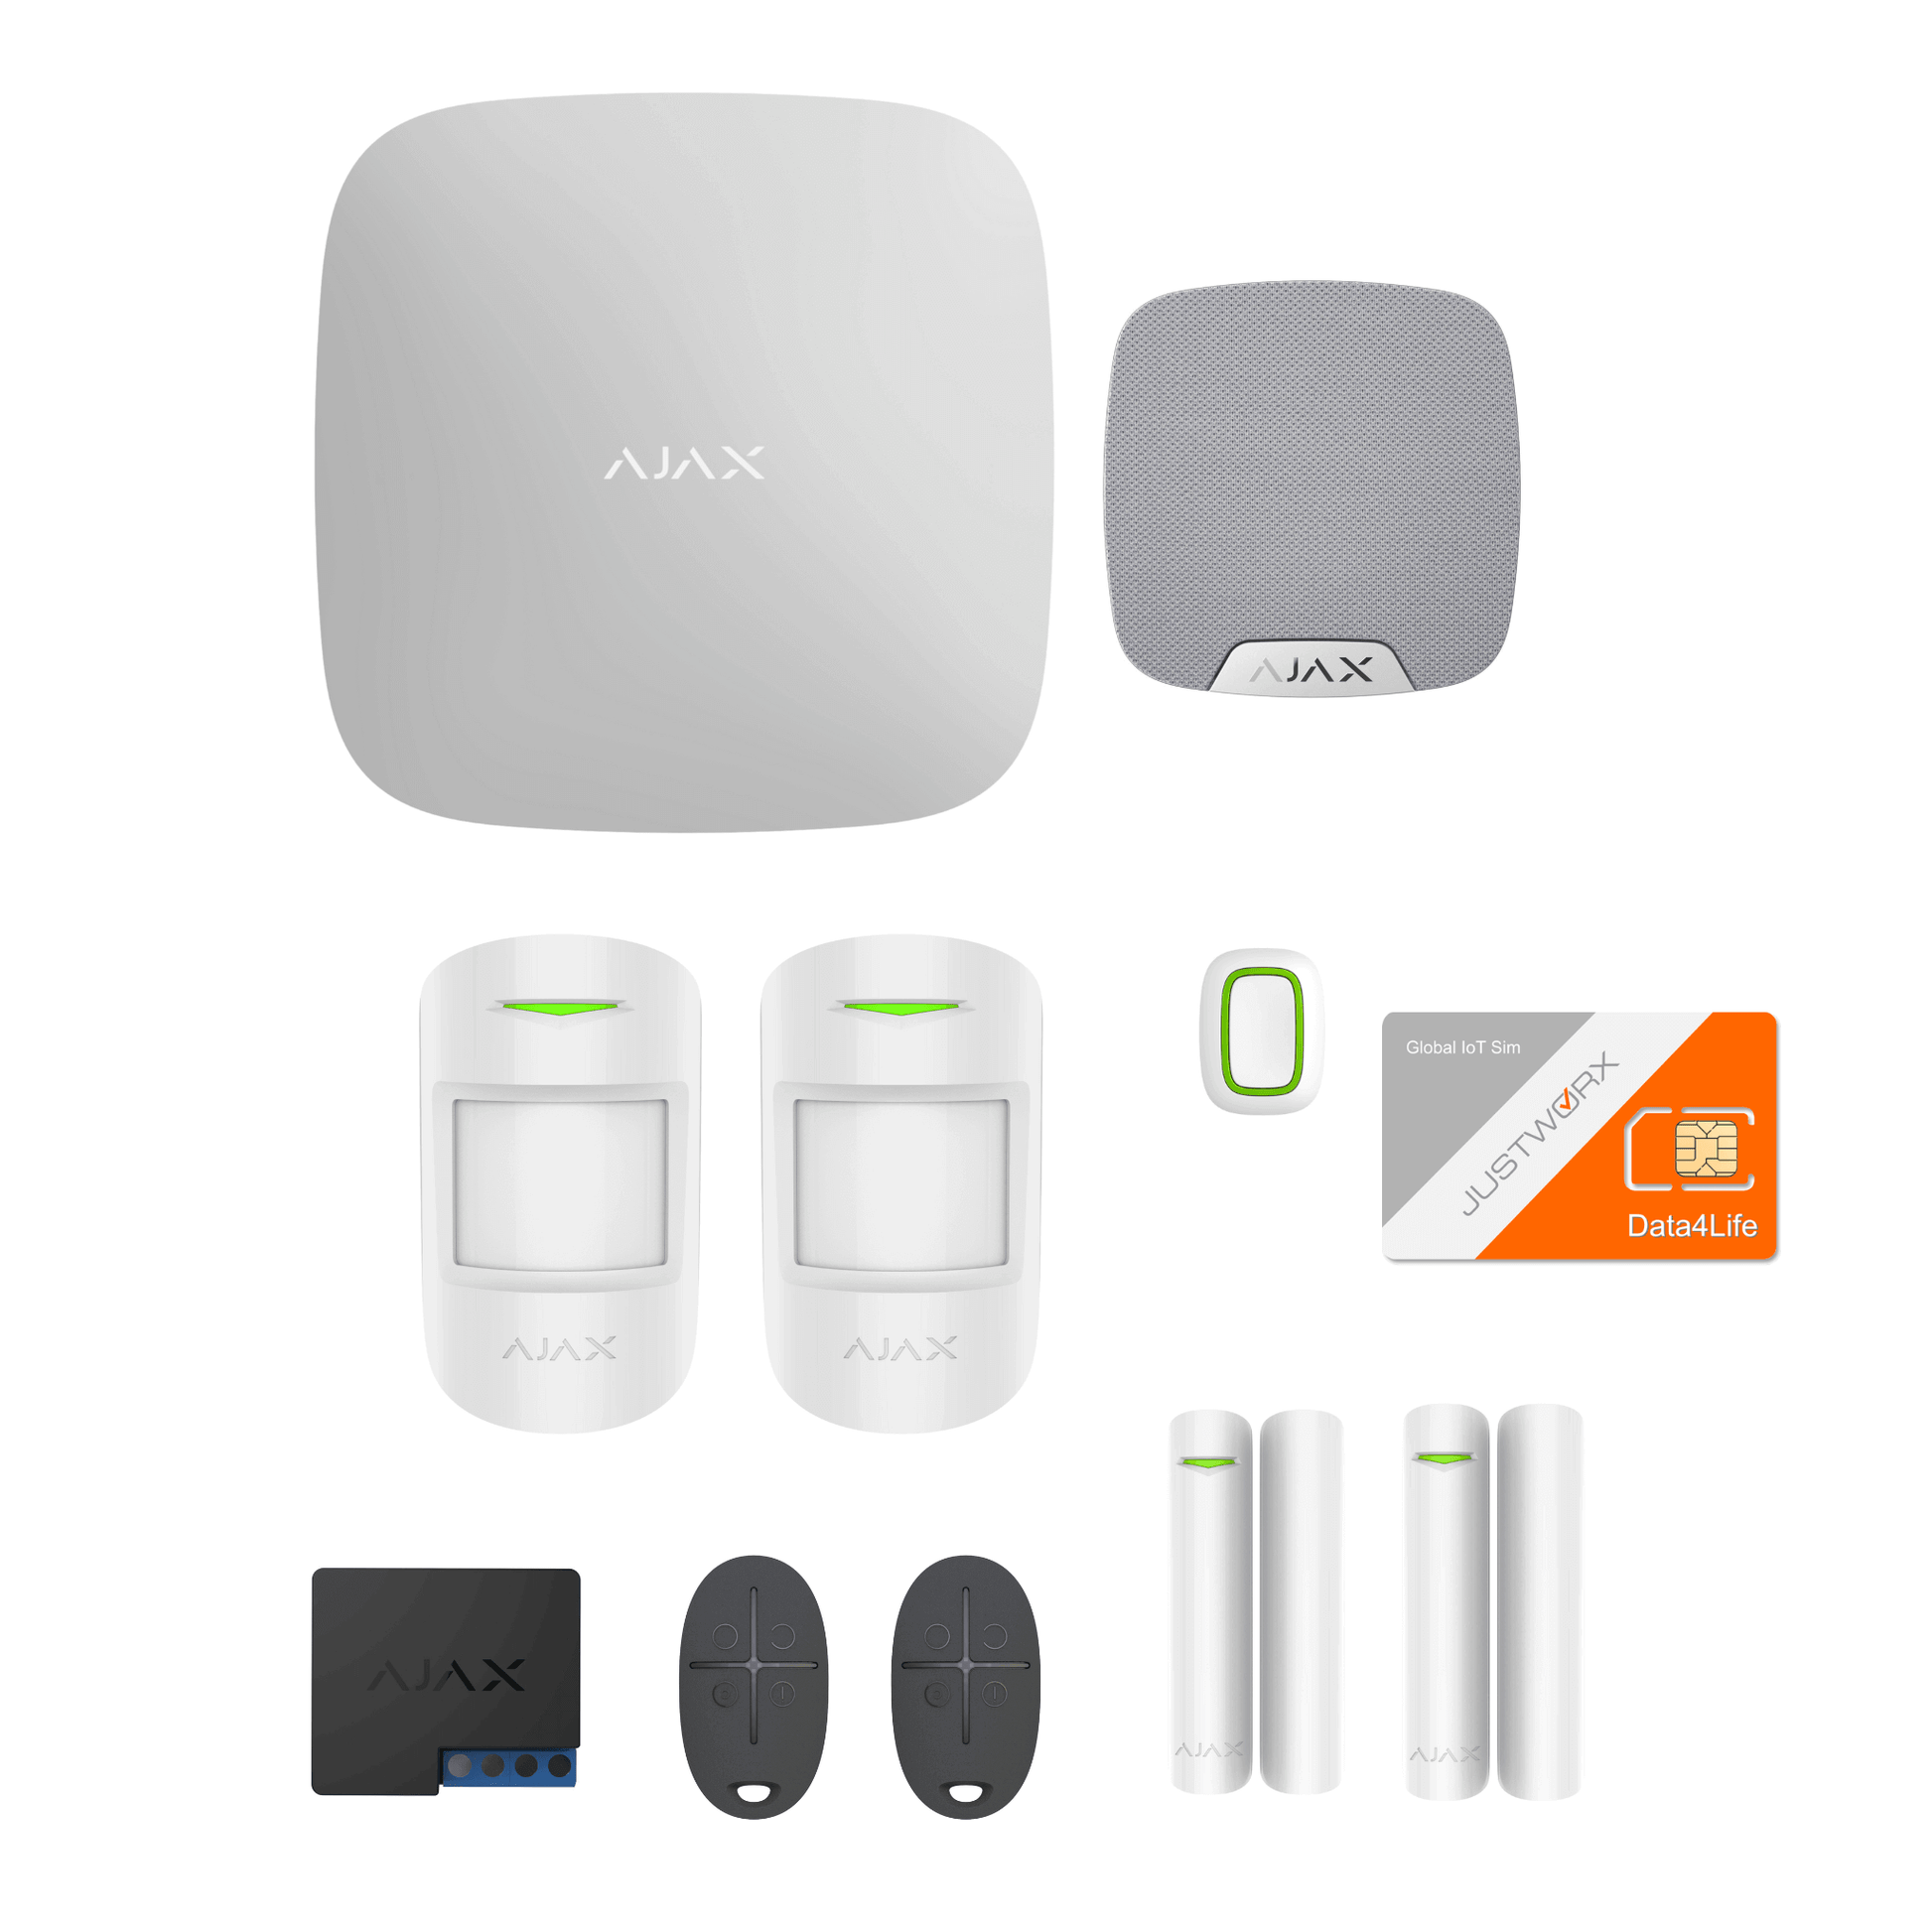 Ajax Family Kit, includes all necessary devices for indoor Security, Ajax motionProtects, Ajax DoorProtect, Ajax Relay, Ajax HomeSiren, Ajax SpaceControl, JustWorx Sim card full view of contents in box